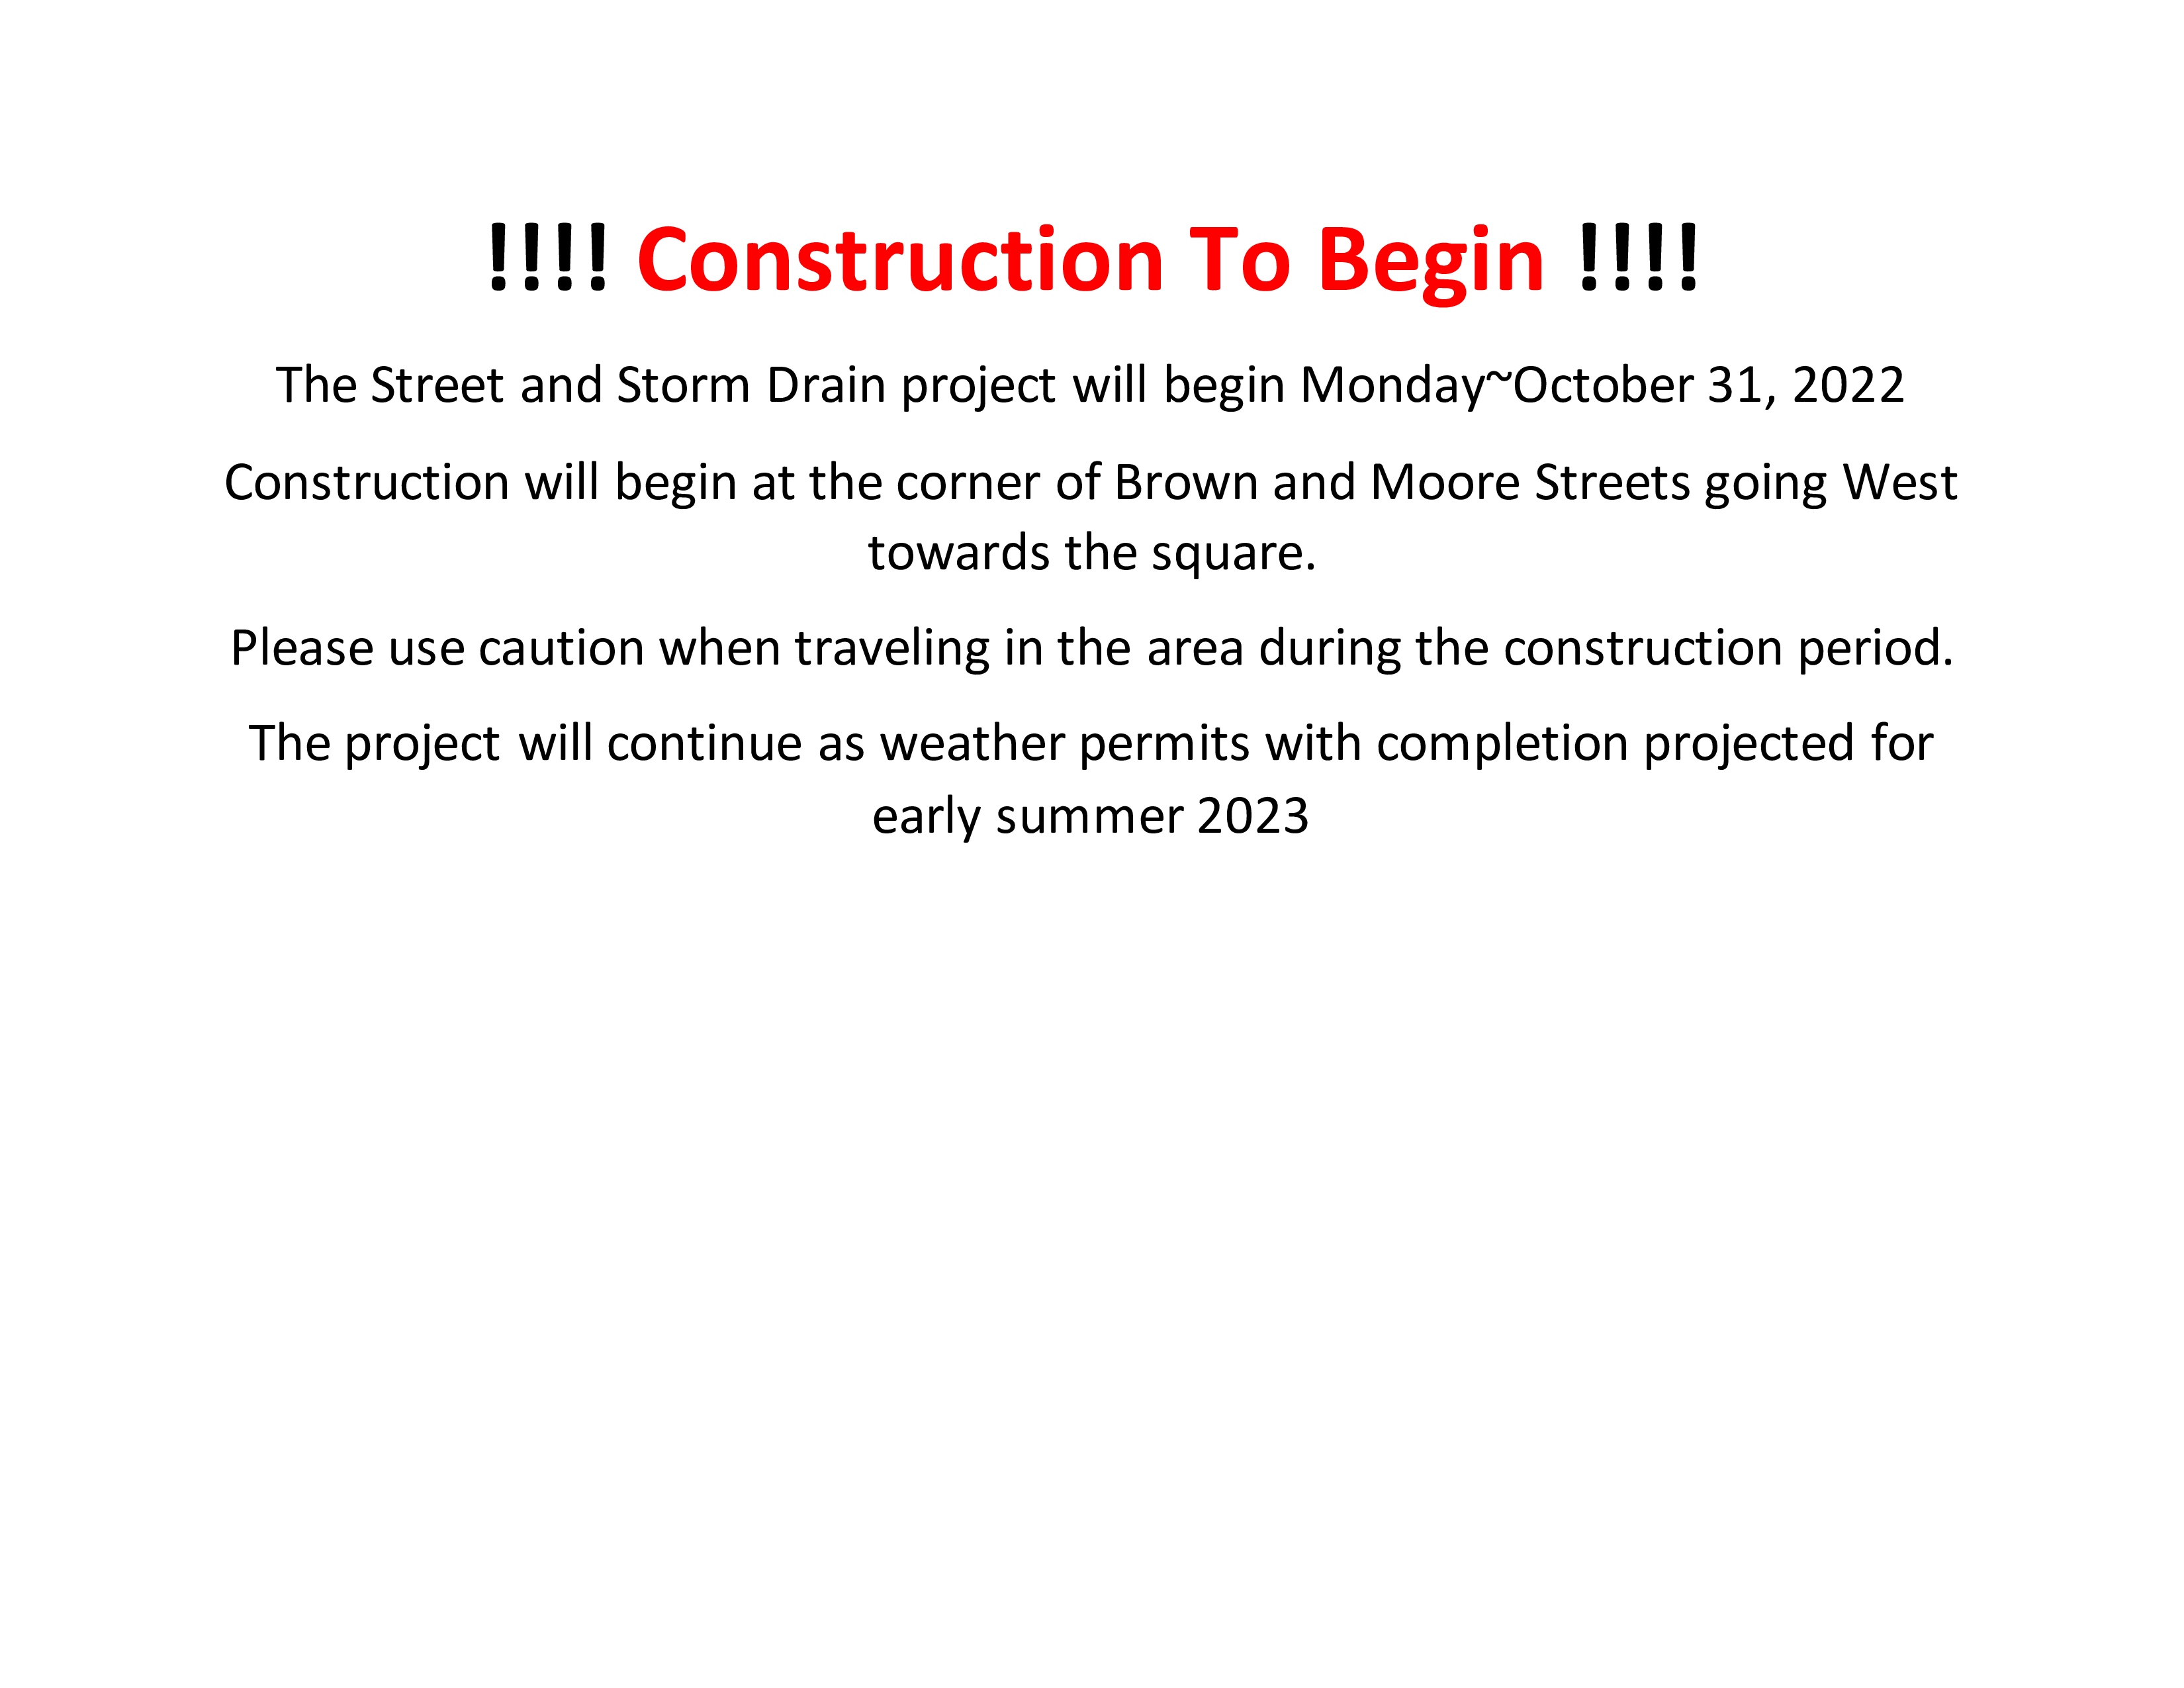 image-973126-Construction_To_Begin-9bf31.png